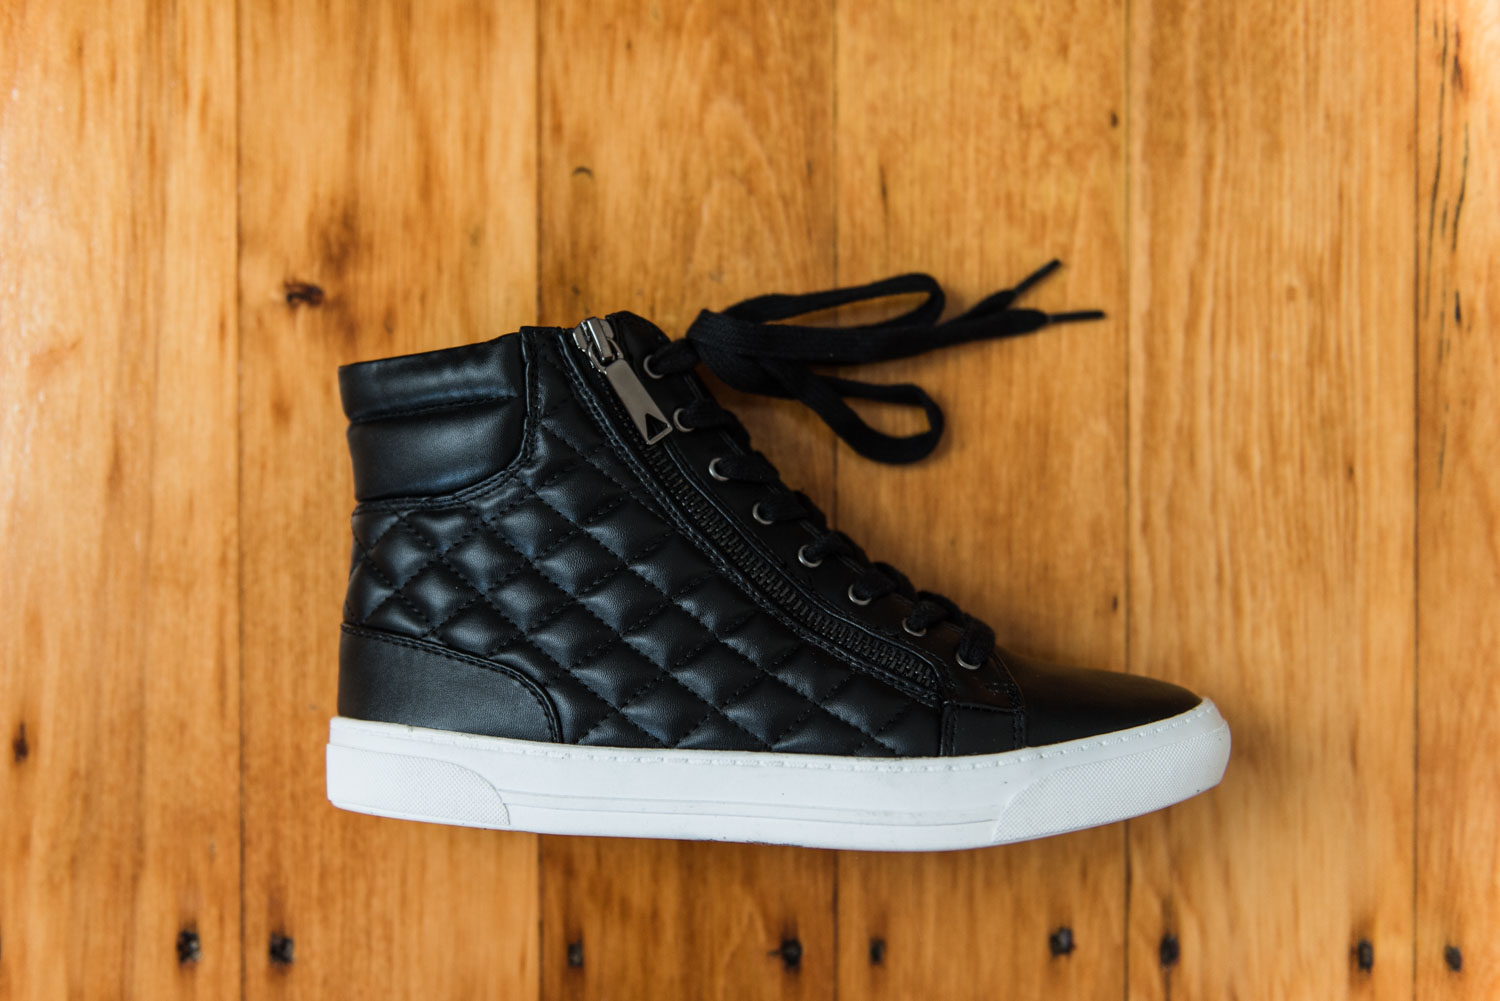 Personal Style | High-Top Black Sneakers | Lorna Stell | Photographer | Boston MA